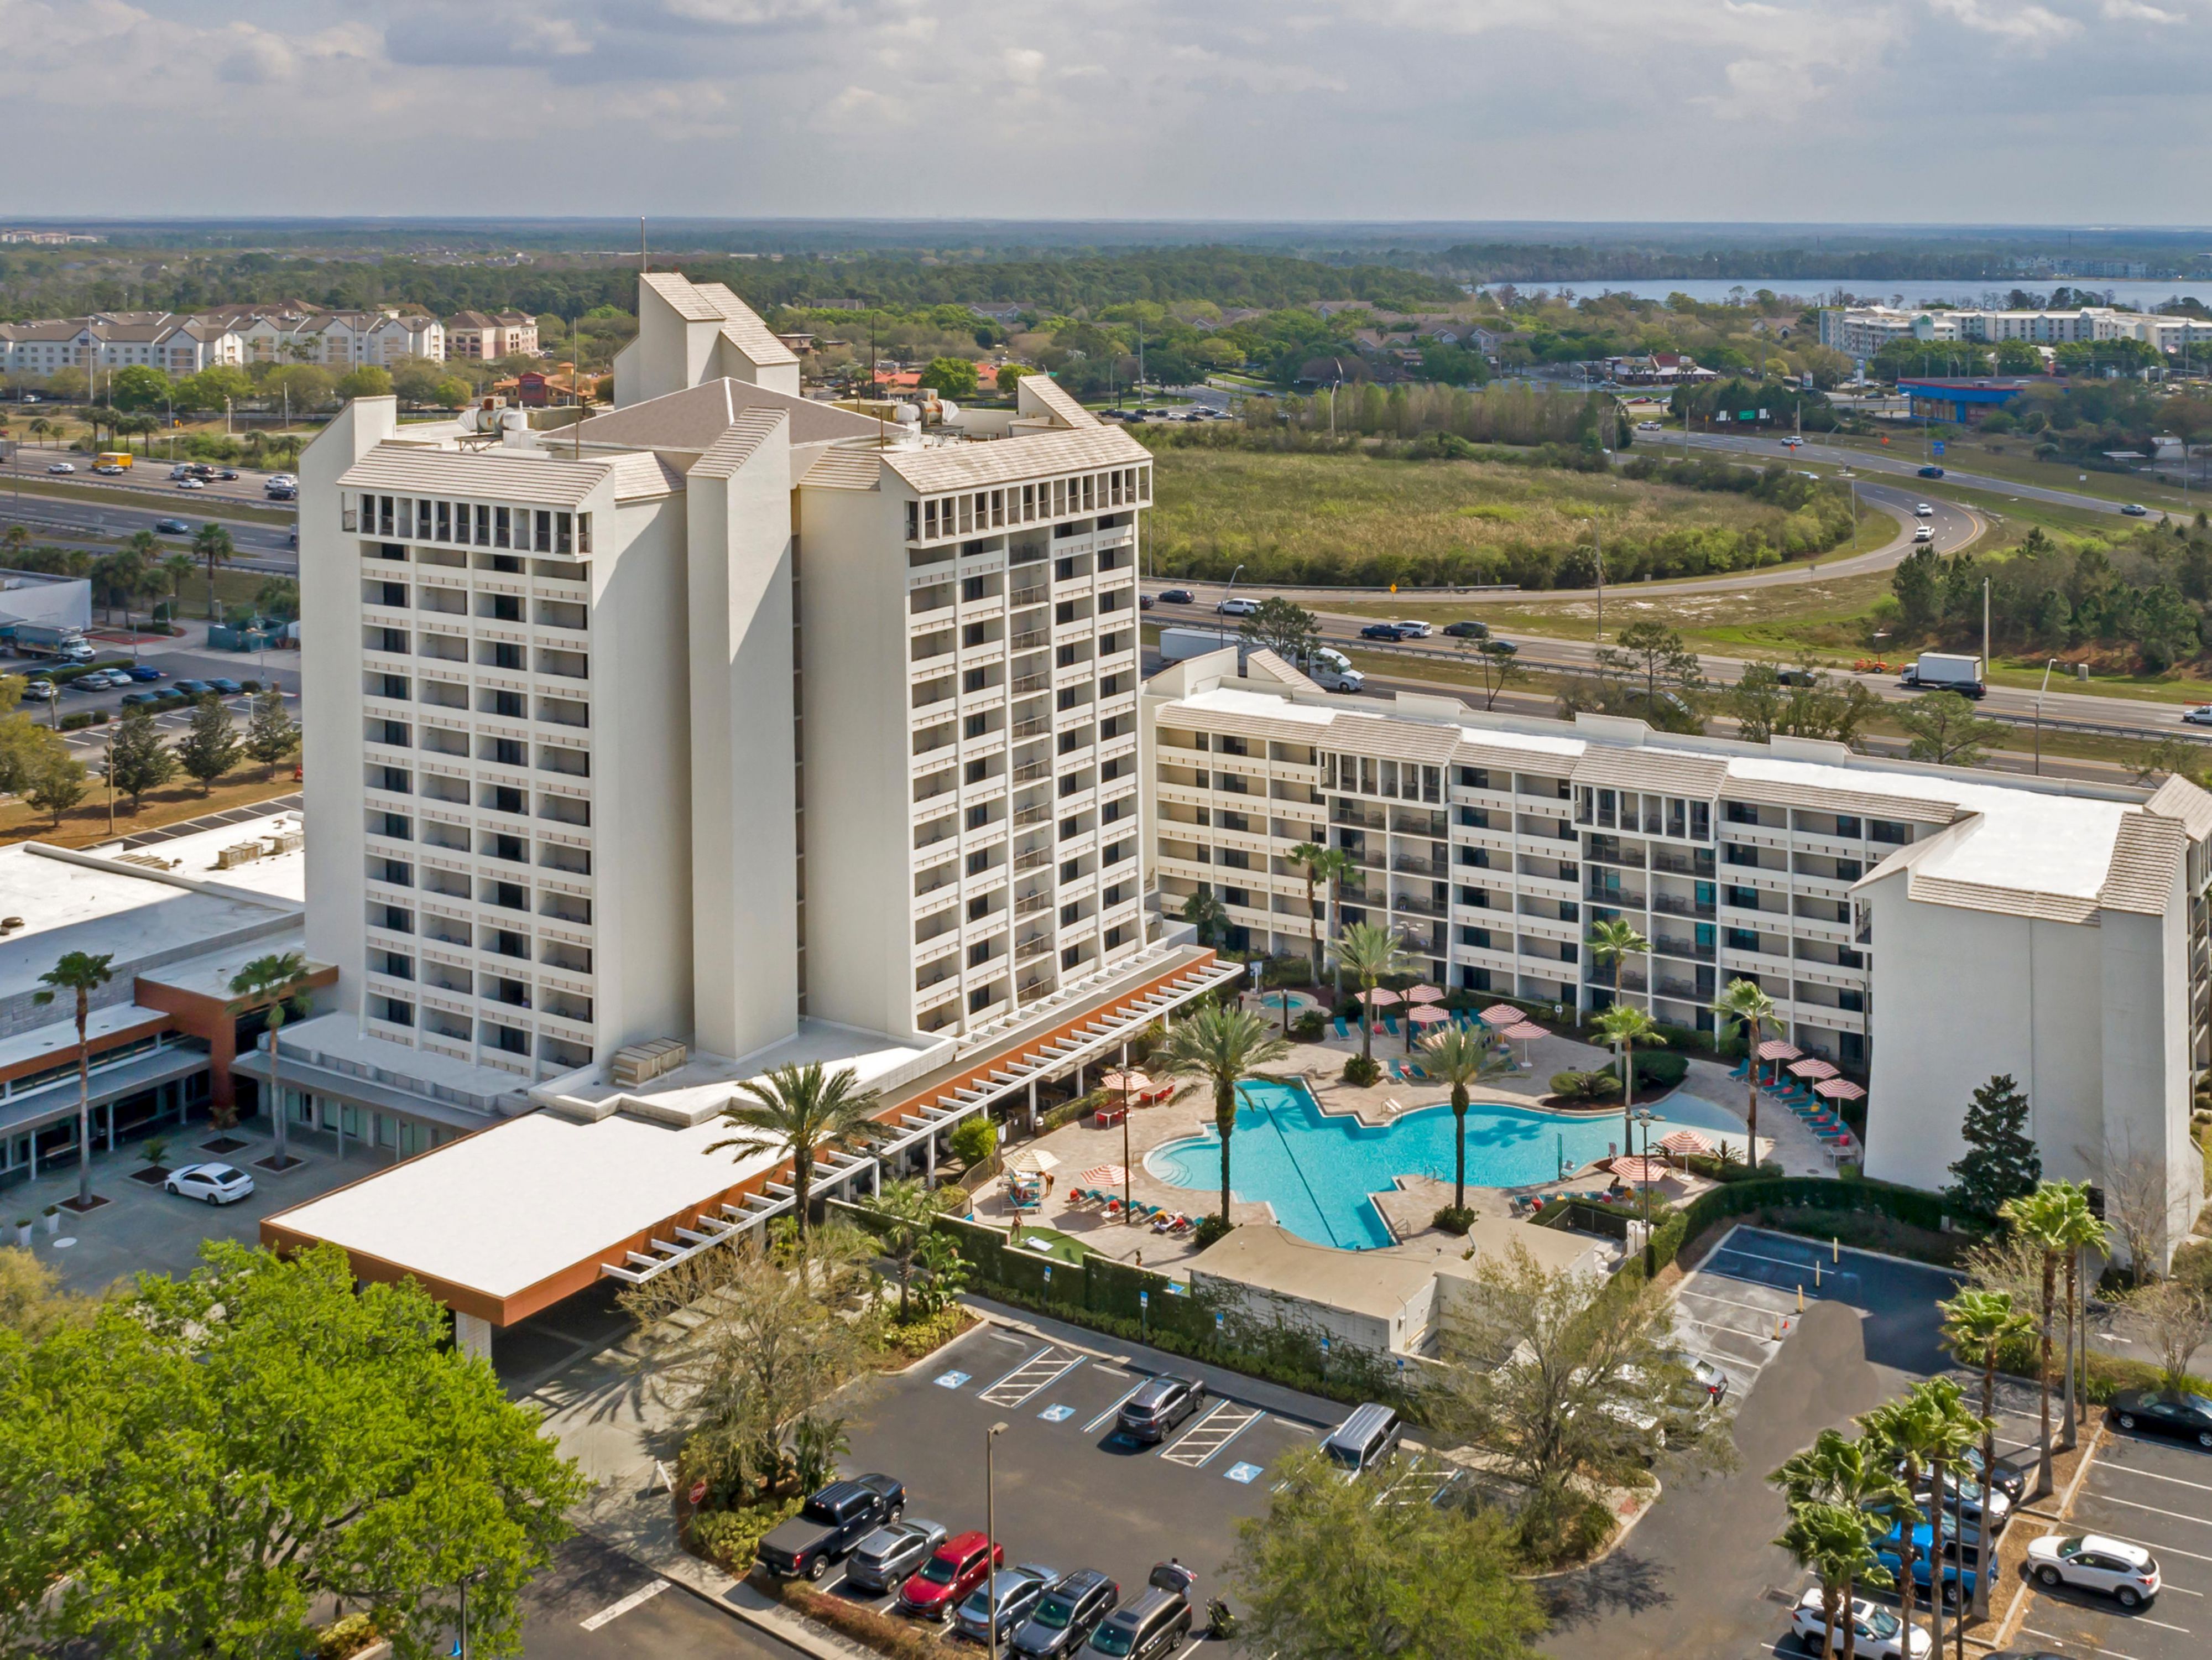 Take a look inside the Holiday Inn Orlando Disney Springs Are by visiting our Virtual Tour link. View our guest rooms, meeting space, restaurant, pool and more. Step inside and see why our hotel is one of the top rated hotels on TripAdvisor in Orlando before you even arrive!